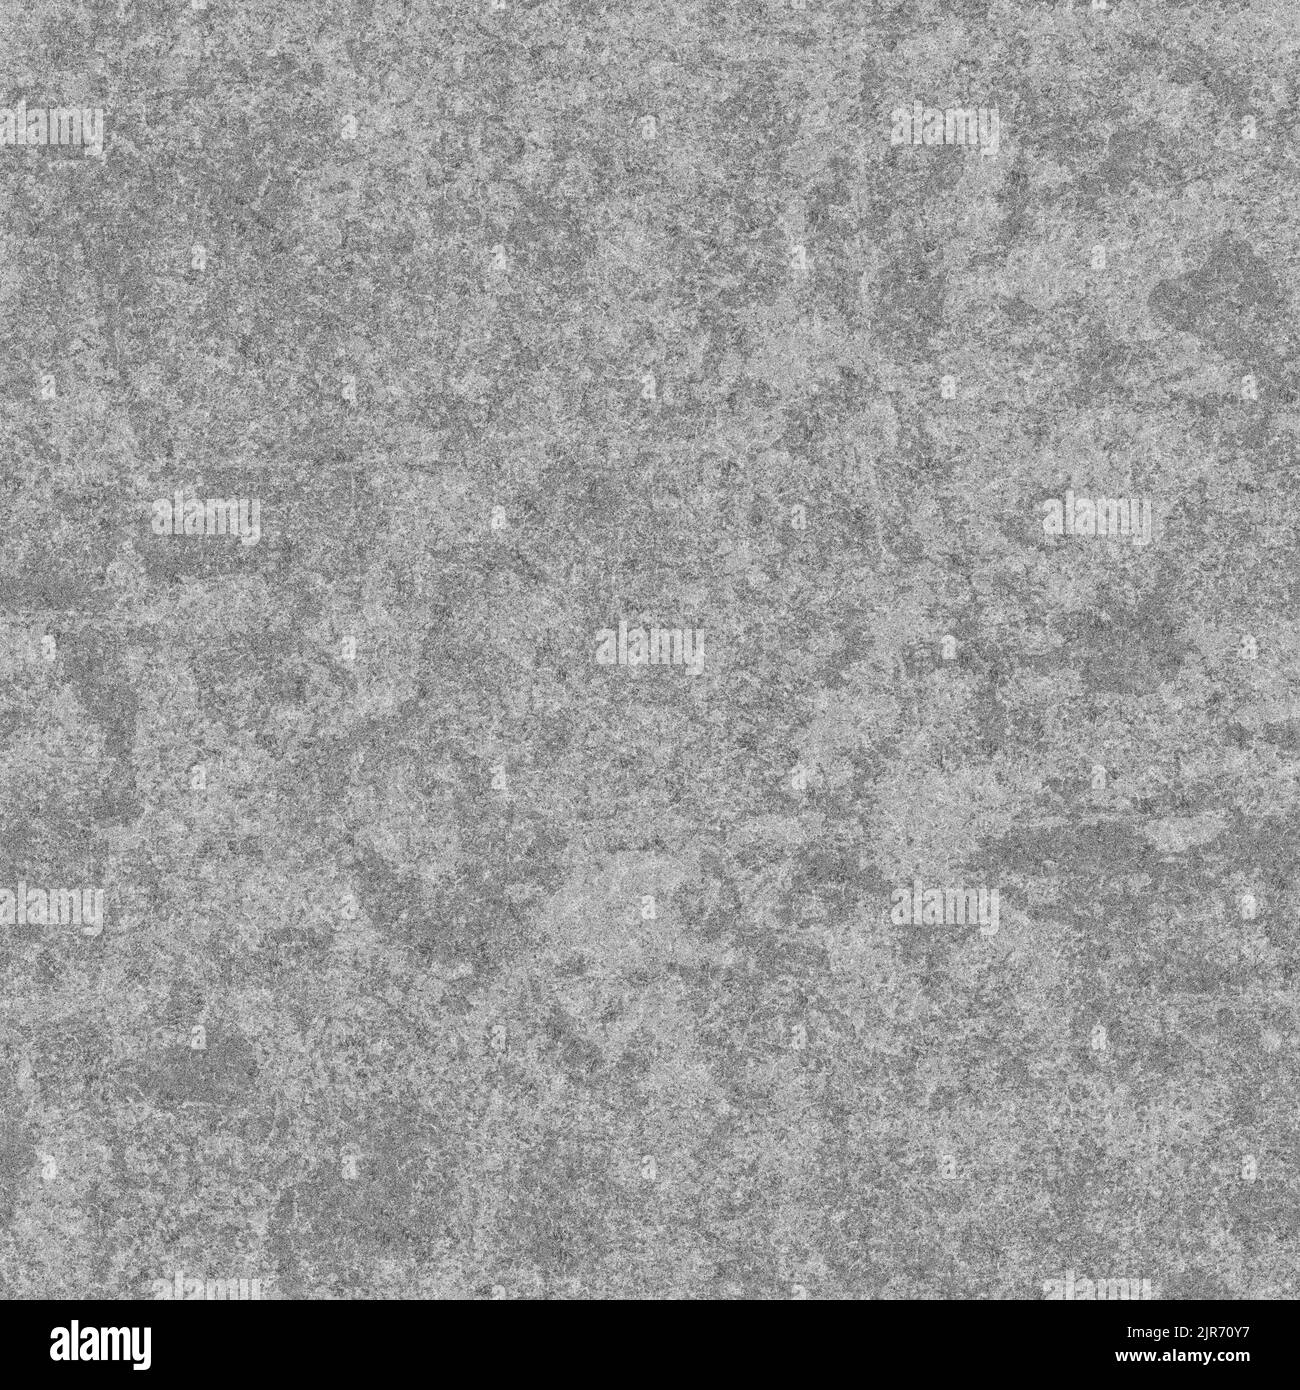 Bump map and displacement map concrete Texture, bump mapping Stock ...